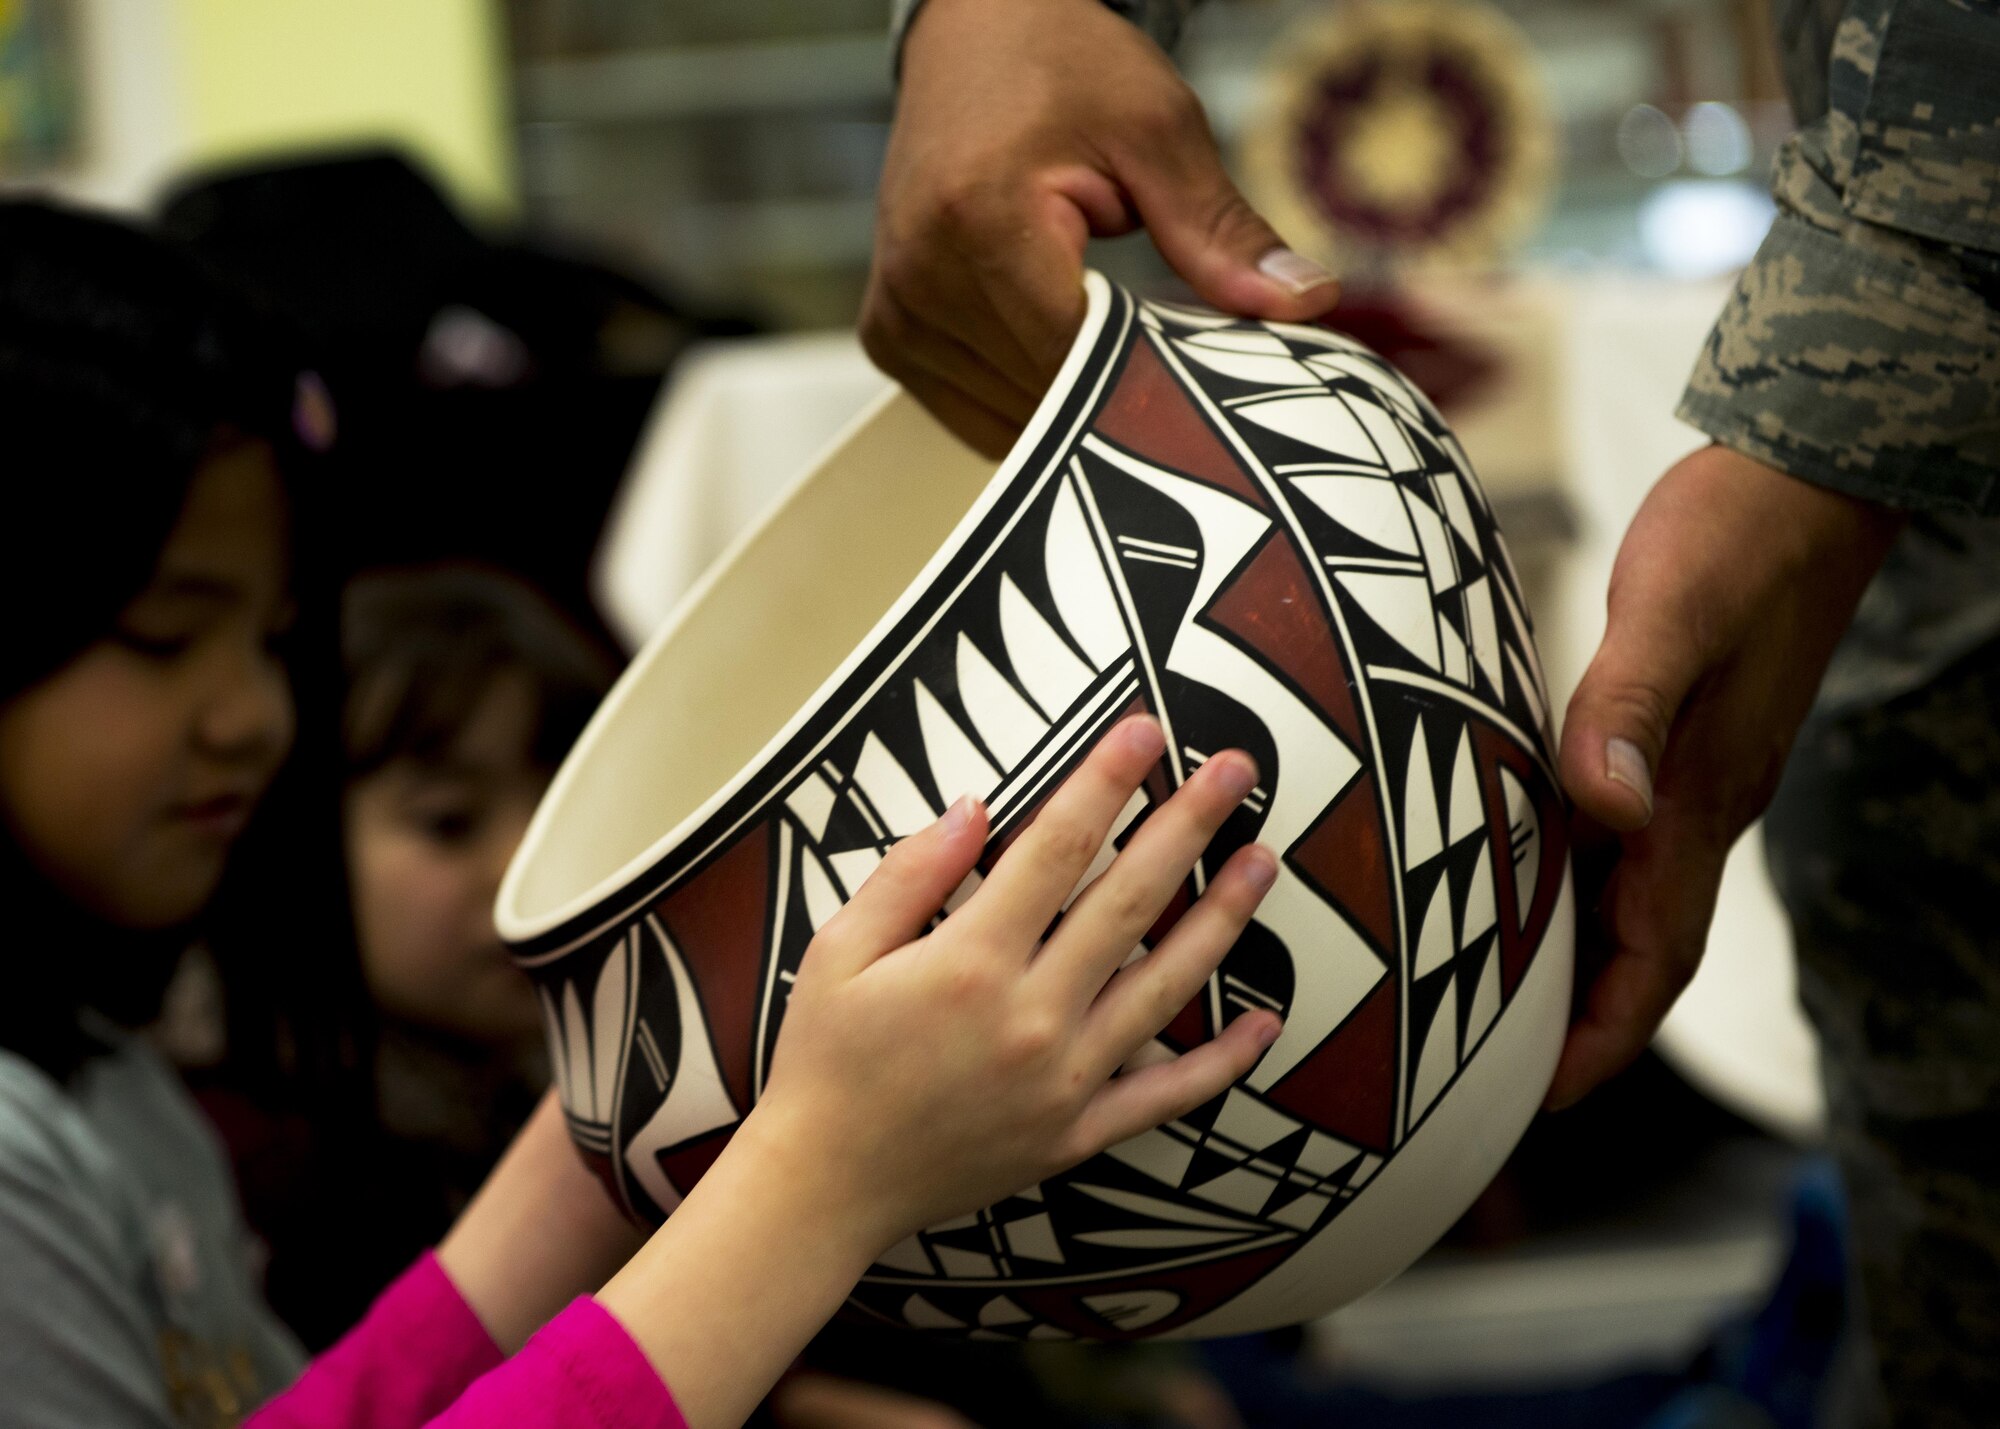 Master Sgt. Edward M. Silversmith, 374th Maintenance Squadron flight chief, lets a child feel the outside surface of traditional Navajo pottery during a National American Indian Heritage Month event at Mendel Elementary School on Nov. 30, 2016, at Yokota Air Base, Japan. Yokota’s NAIHM committee held more than 30 reading sessions at Yokota elementary schools. (U.S. Air Force photo by Airman 1st Class Donald Hudson)